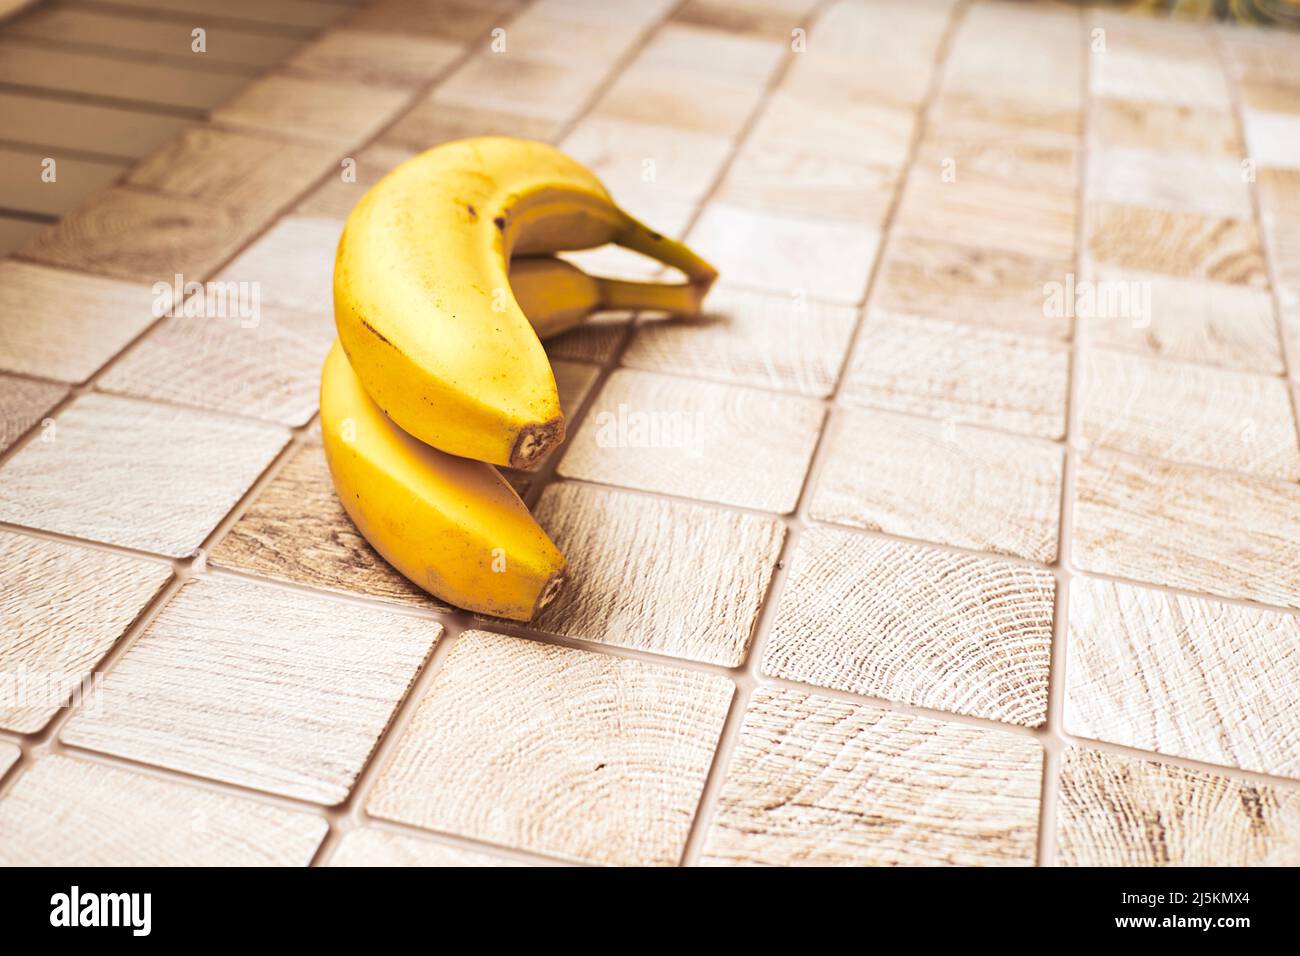 Two ripe bananas on a checkered wooden surface Stock Photo